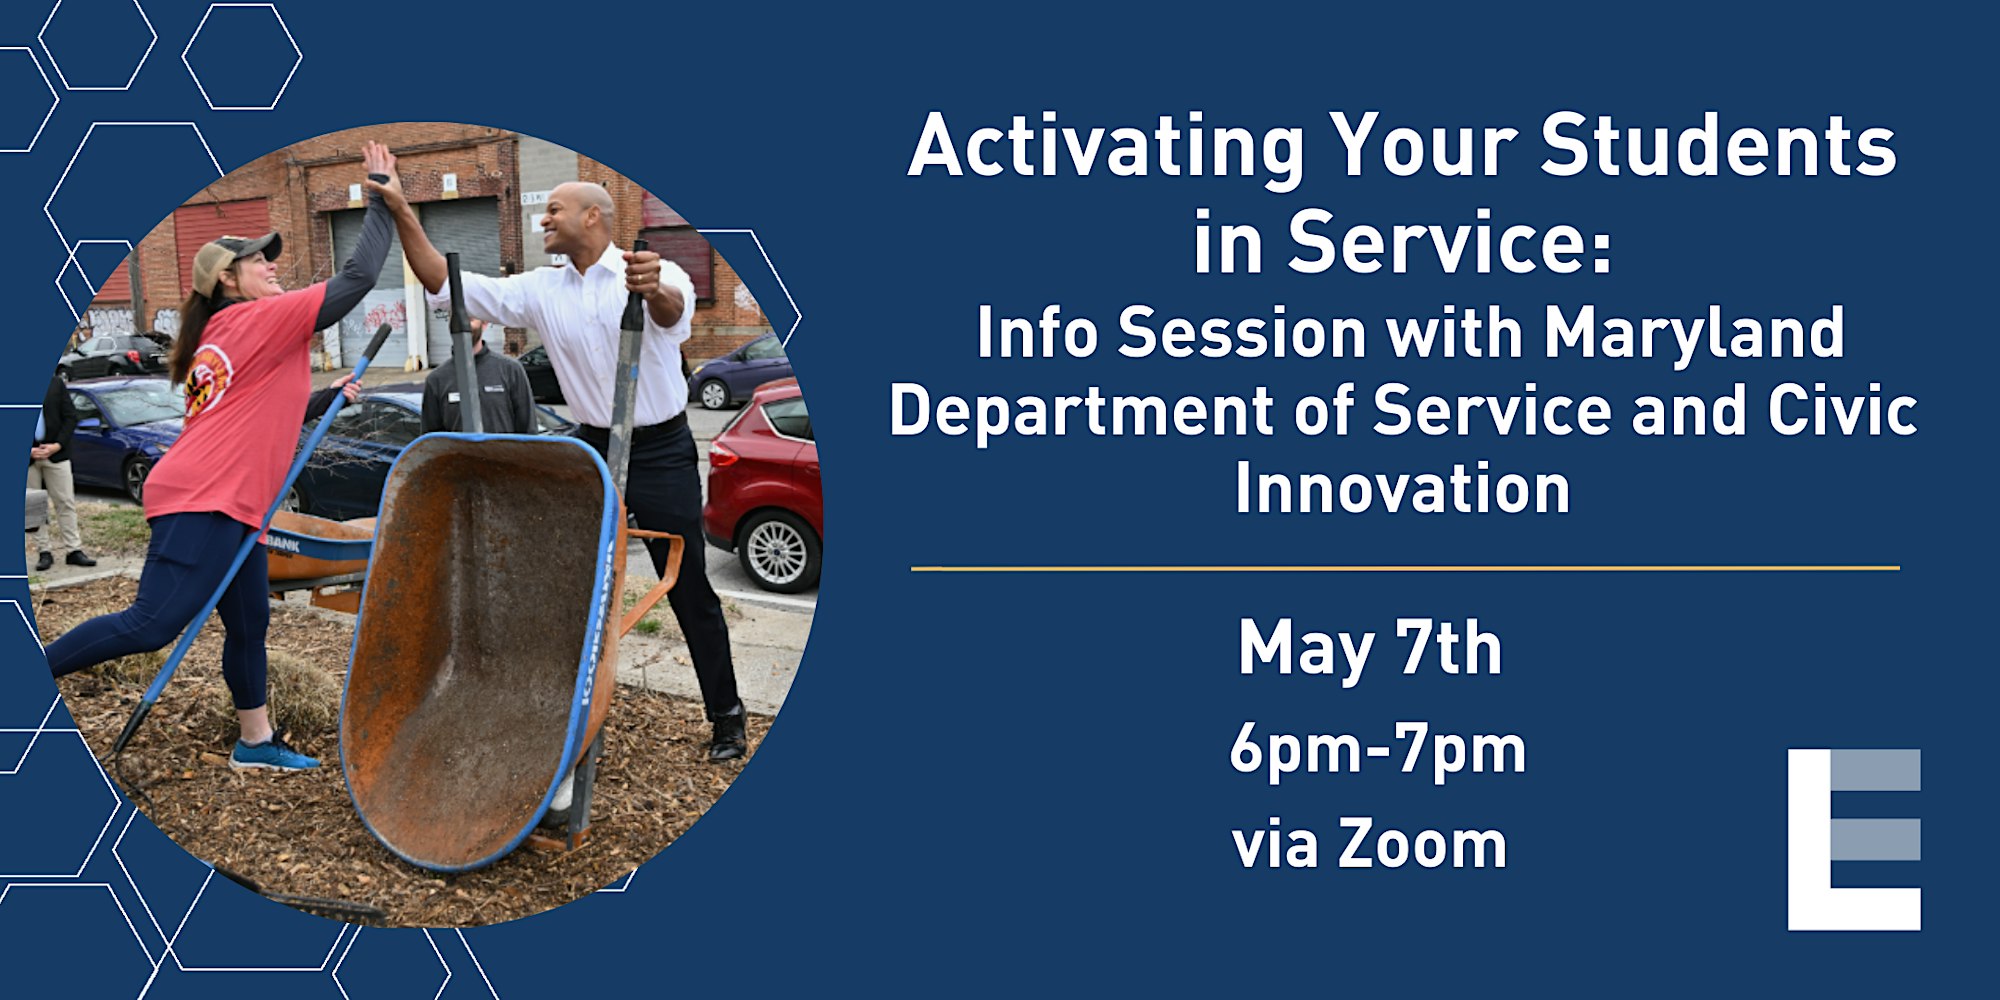 Activating Your Students in Service: May 7th 6-7pm Zoom